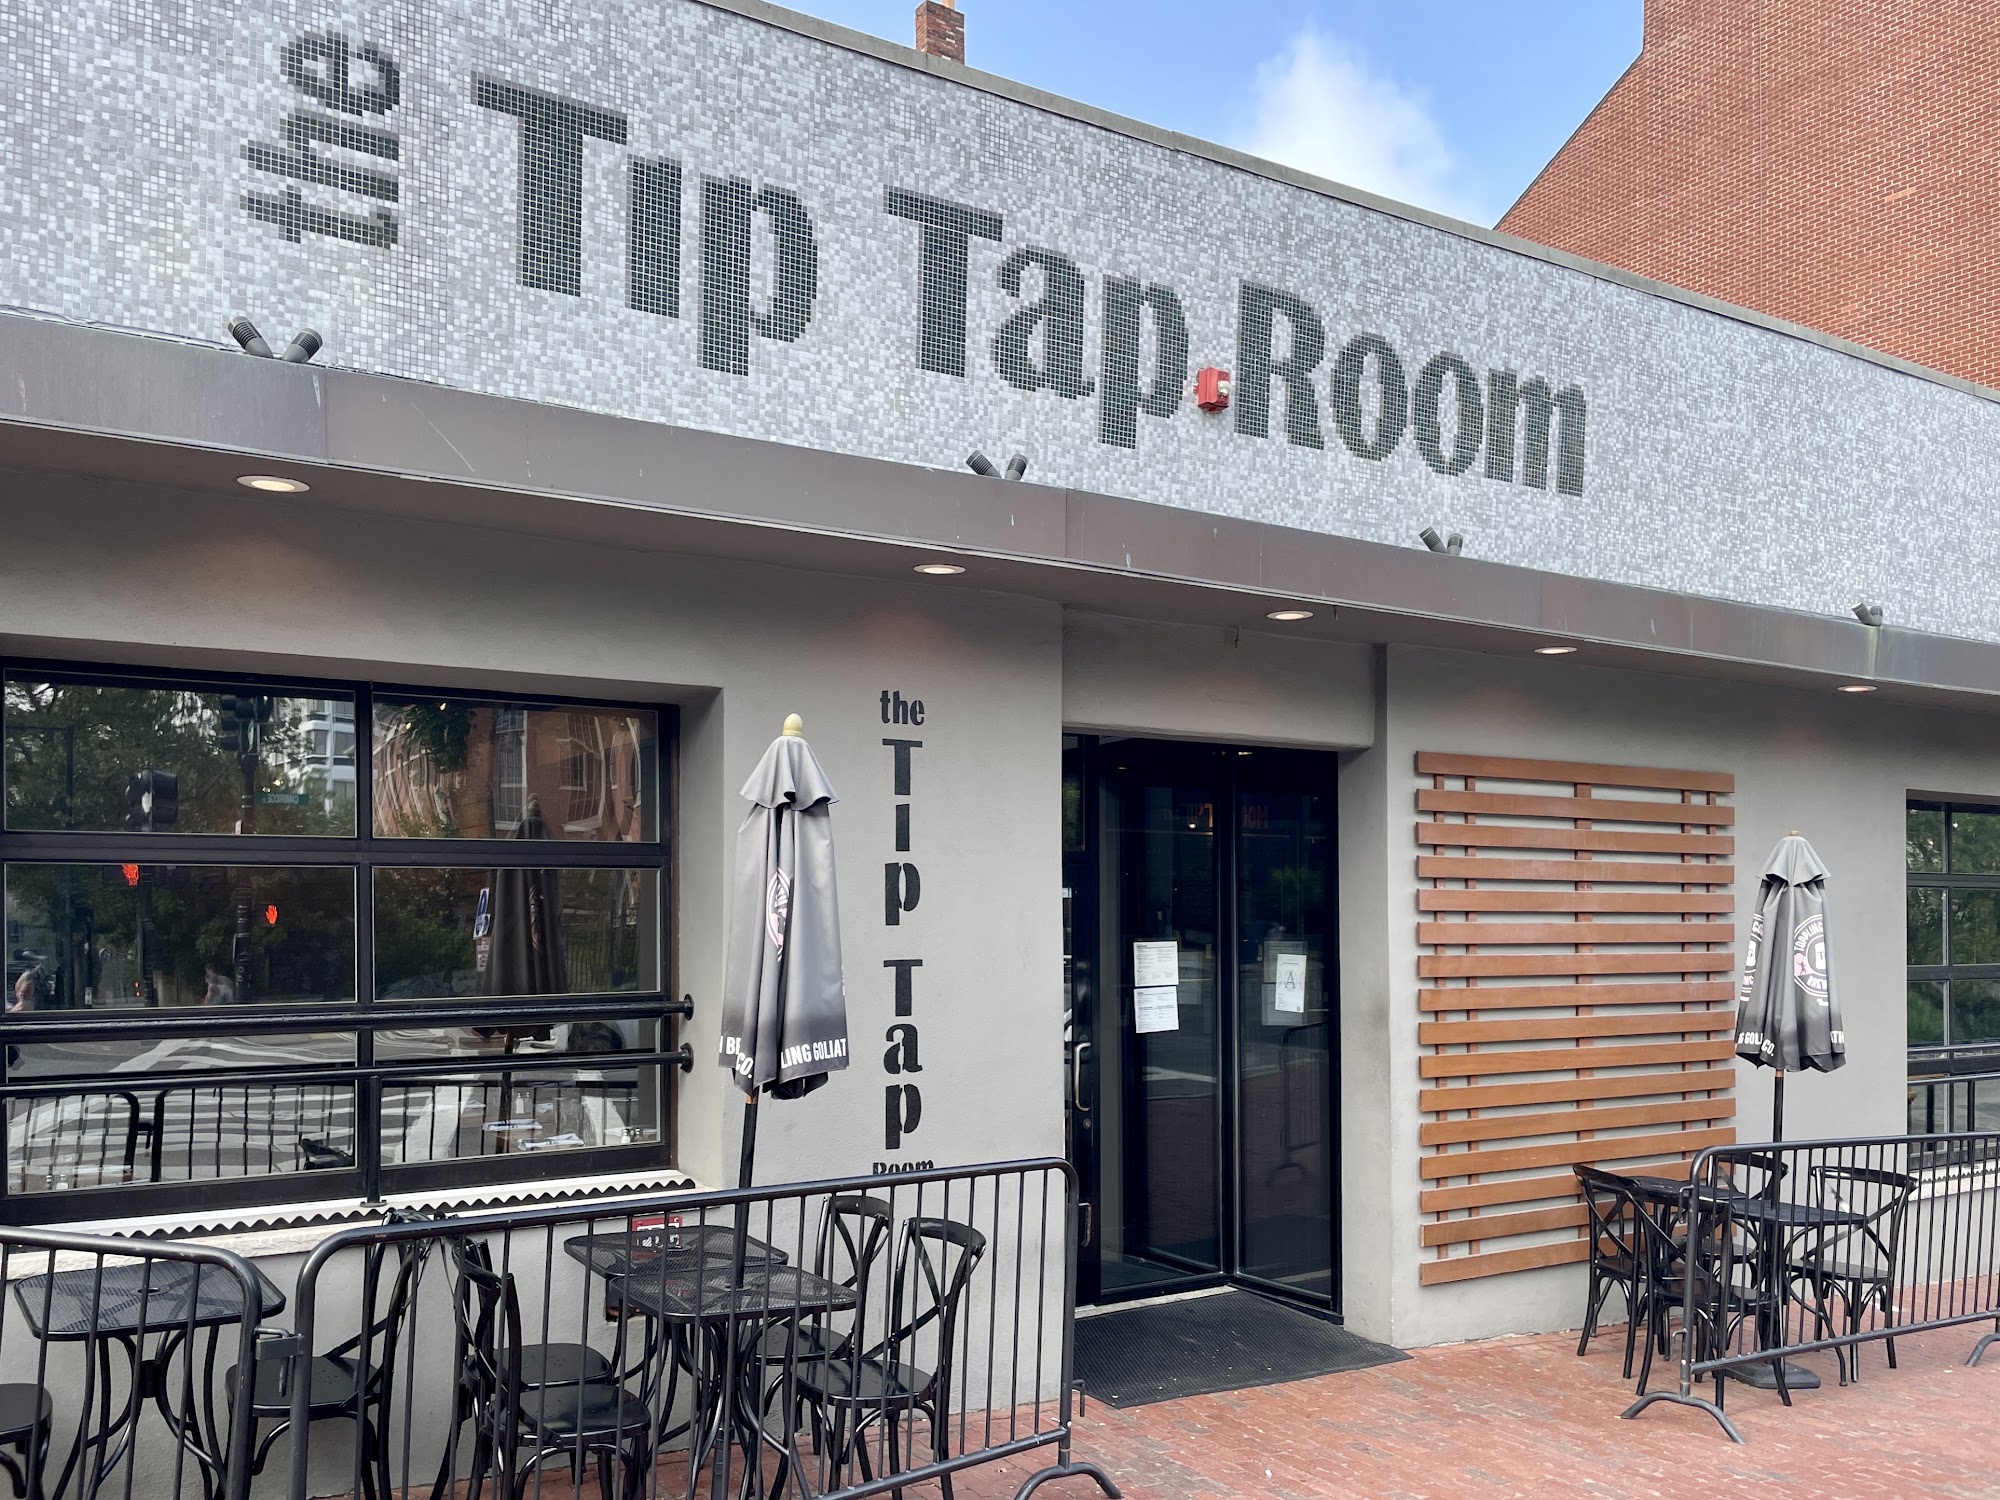 The Tip Tap Room